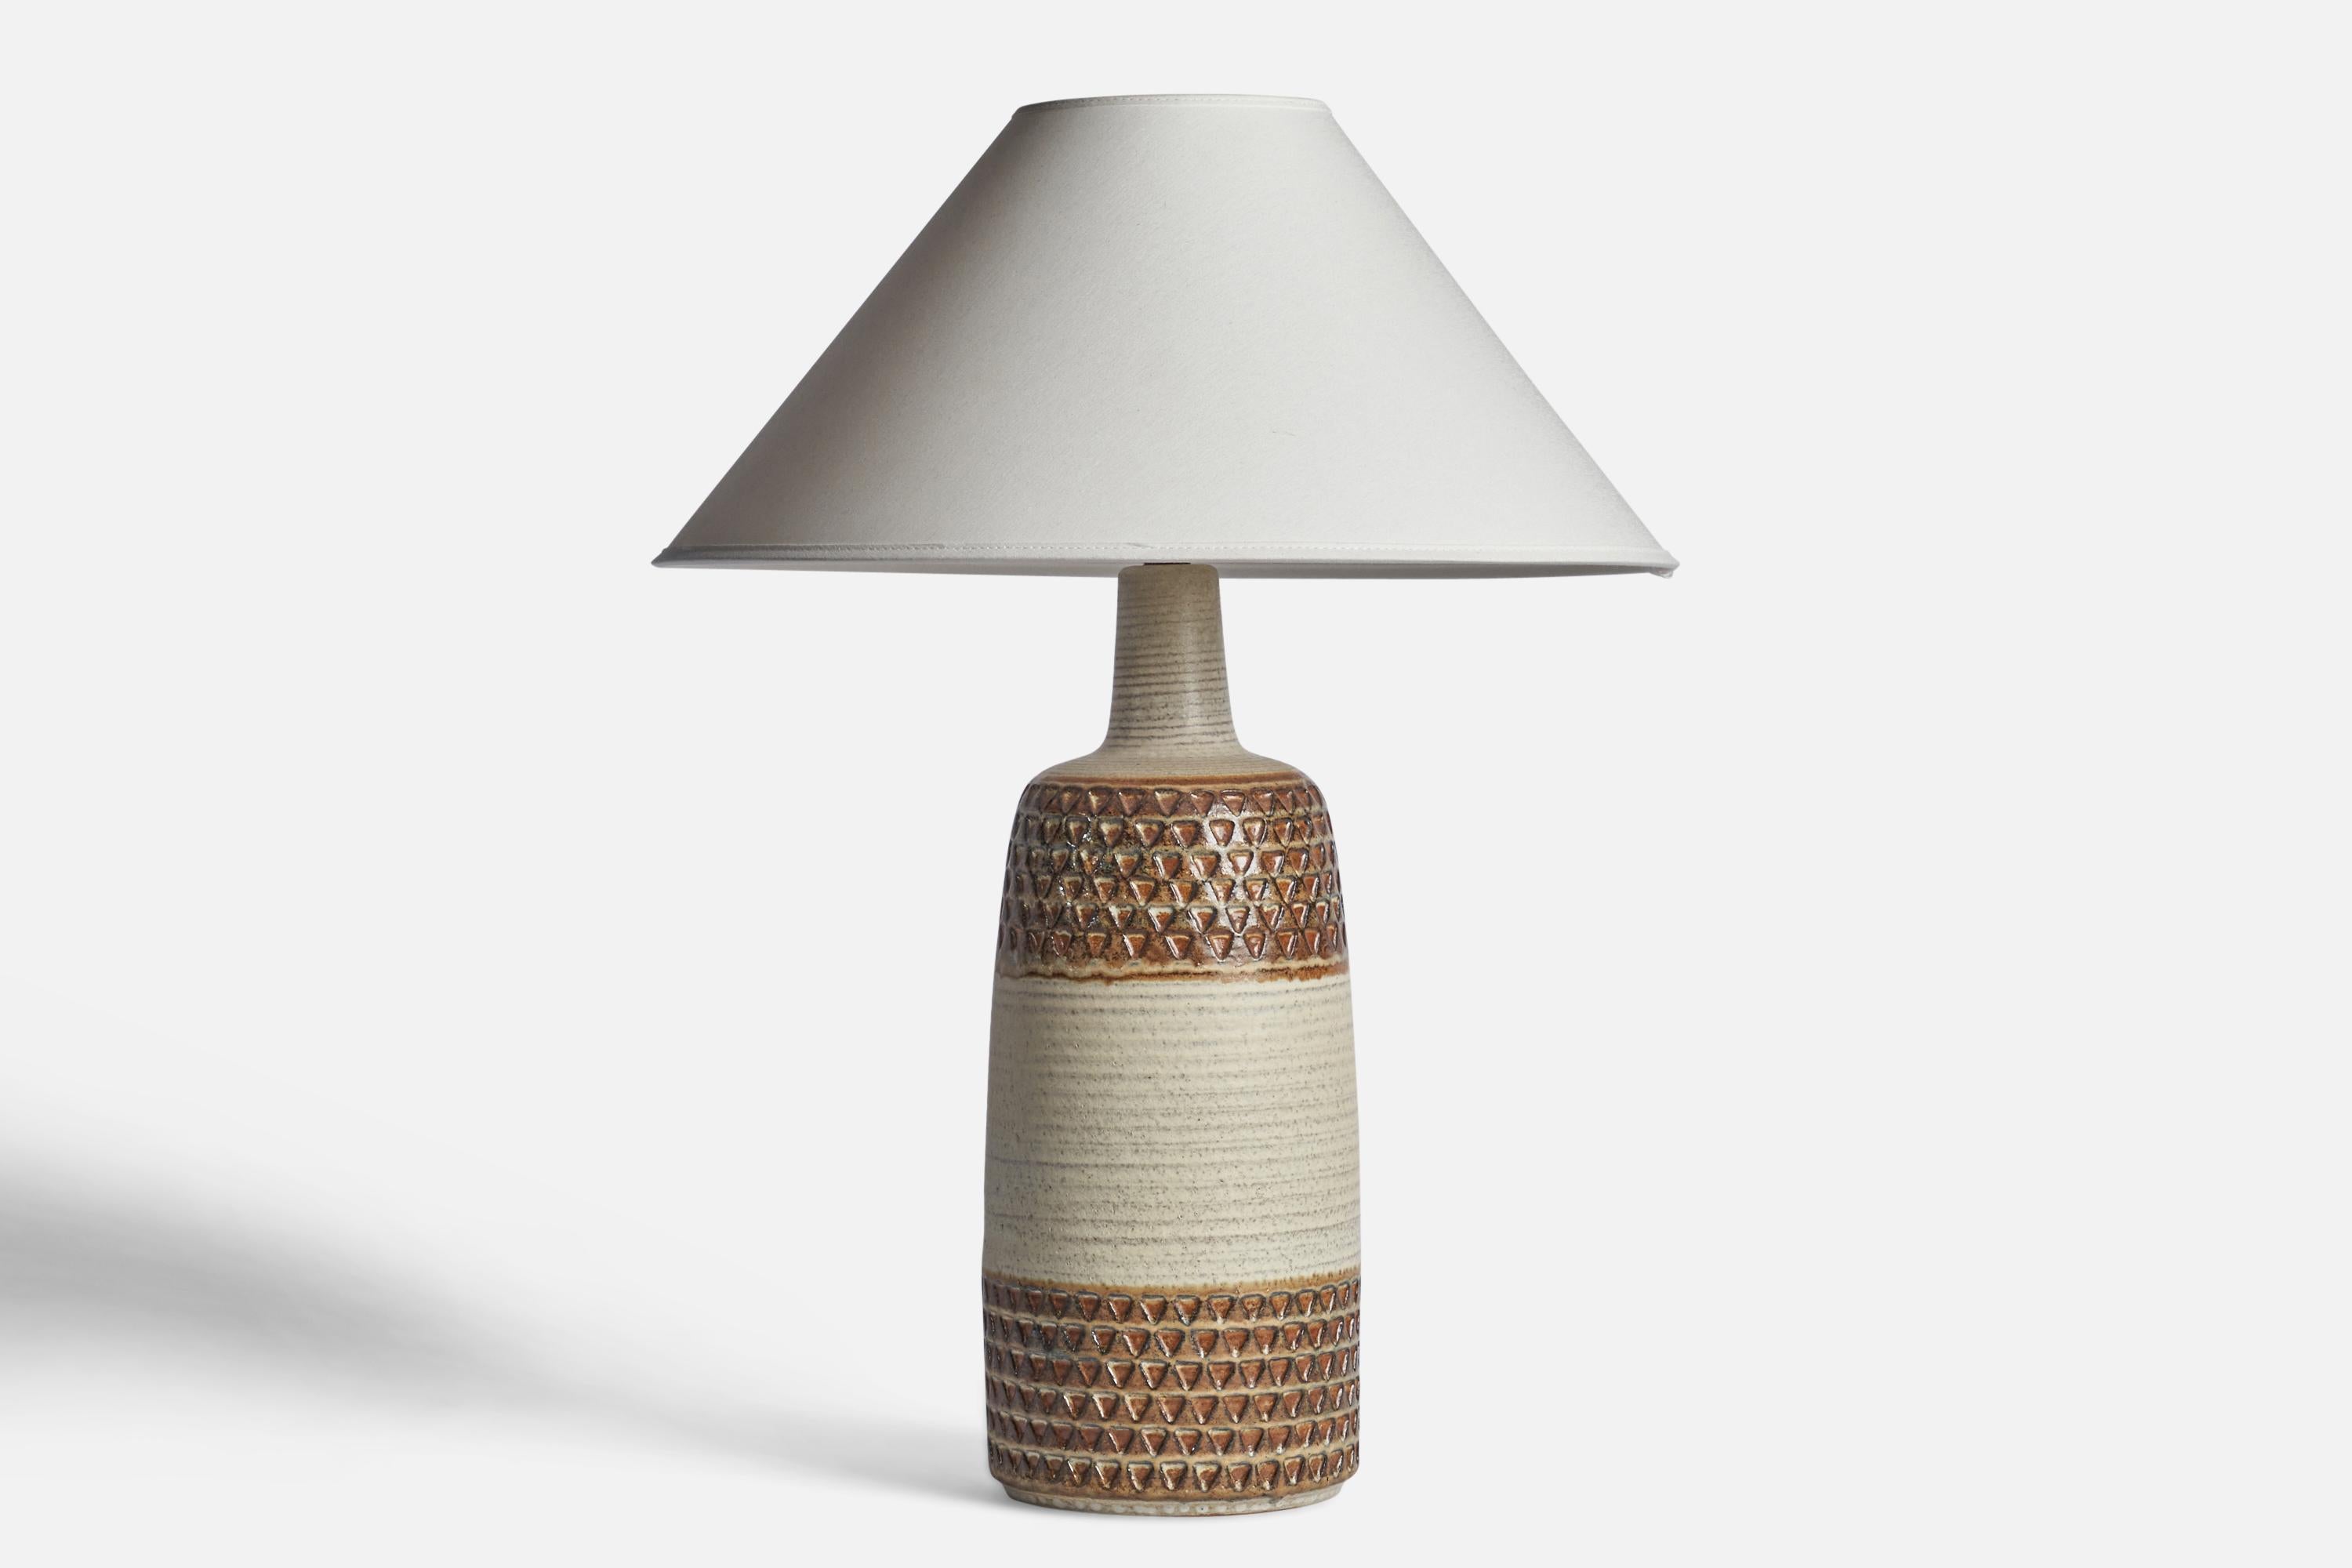 A brown and white-glazed stoneware table lamp designed and produced by Søholm Keramik, Bornholm, Denmark, 1960s.

Dimensions of Lamp (inches): 17” H x 6” Diameter
Dimensions of Shade (inches): 4.5” Top Diameter x 16” Bottom Diameter x 7.25”